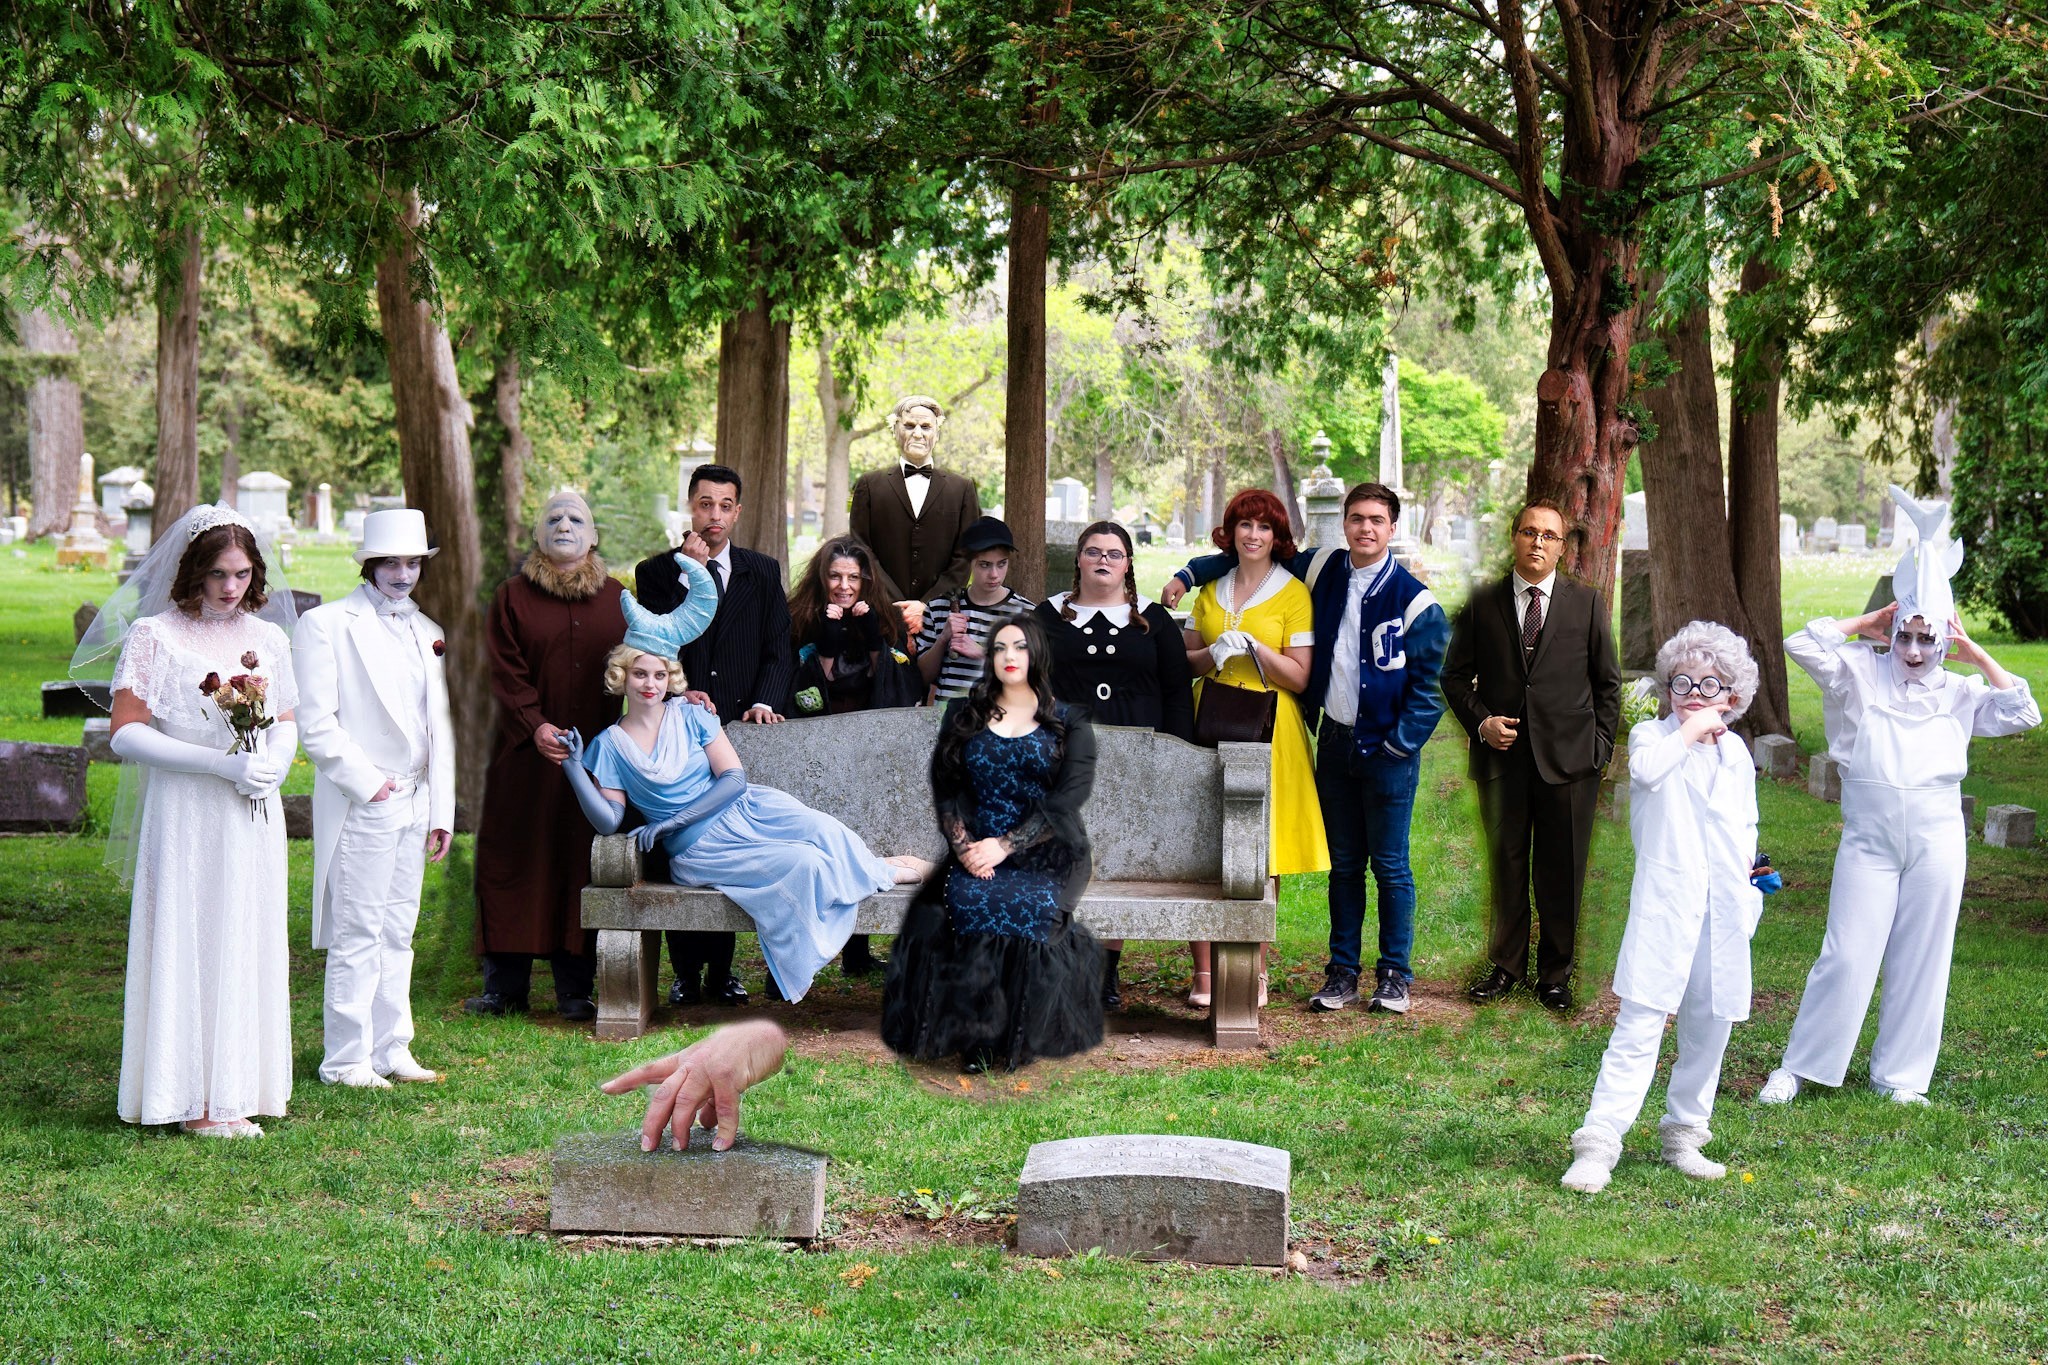 Group of 10 people in a graveyard dressed in spooky costumes